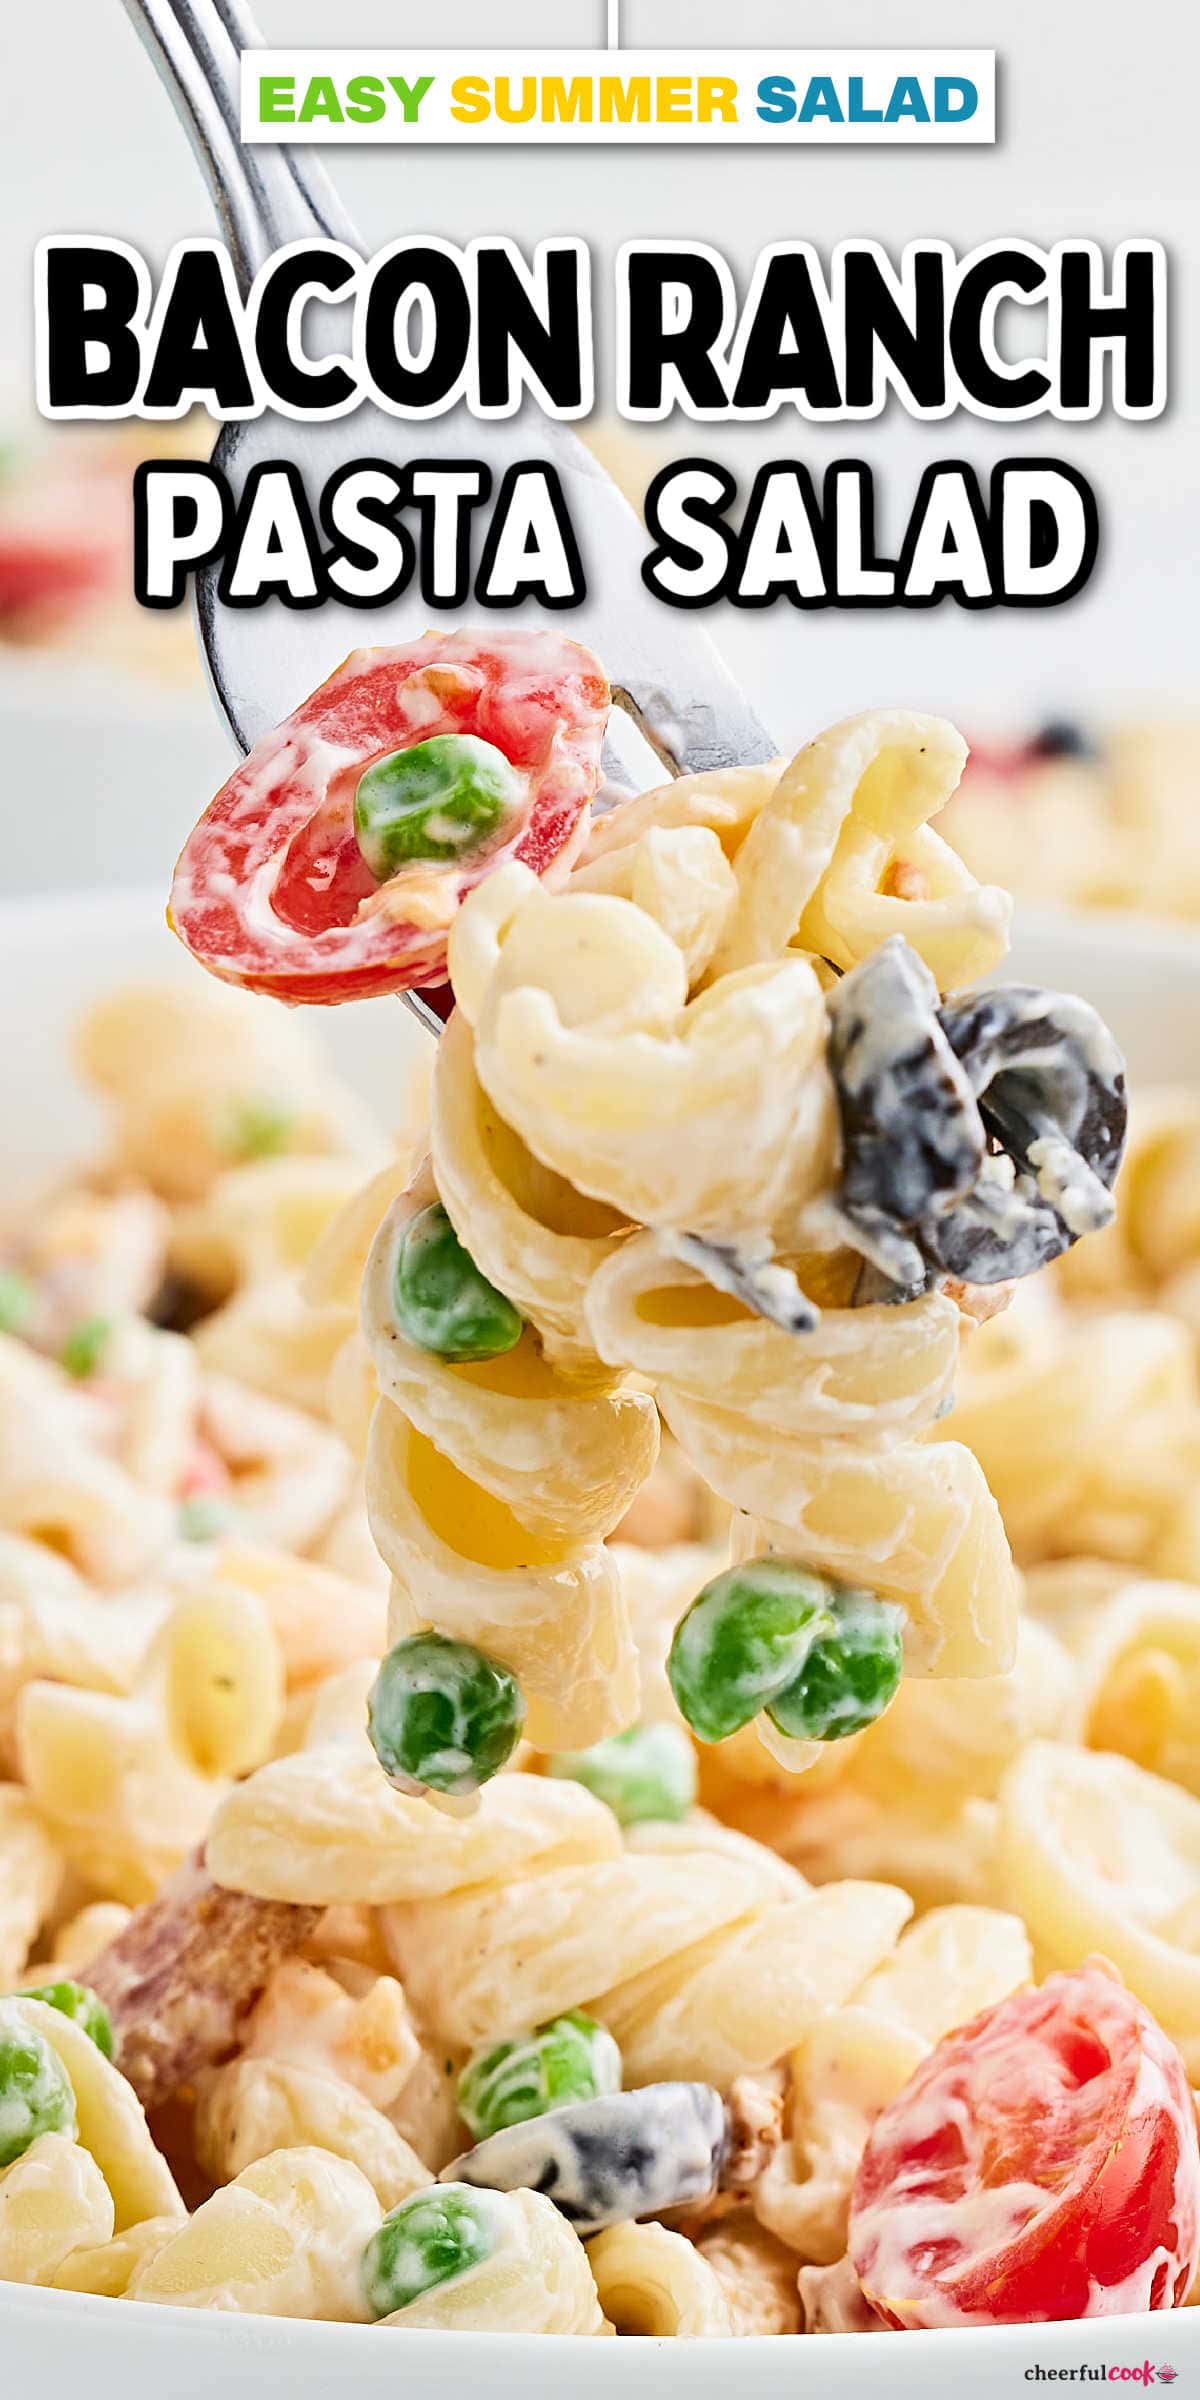 Get ready to indulge in the irresistible Bacon Ranch Pasta Salad! It's a creamy and delicious dish that's a snap to make. In just 30 minutes, you can whip up this delightful cold pasta salad that will have everyone begging for the recipe. Enjoy the delicious combination of crispy bacon, creamy ranch dressing, and perfectly cooked pasta coming together in a delightful blend of tastes. #cheerfulcook #BaconRanchPastaSalad  #EasyRecipe #ColdSalad #PotluckRecipes #PicnicFood ♡ cheerfulcook.com  via @cheerfulcook